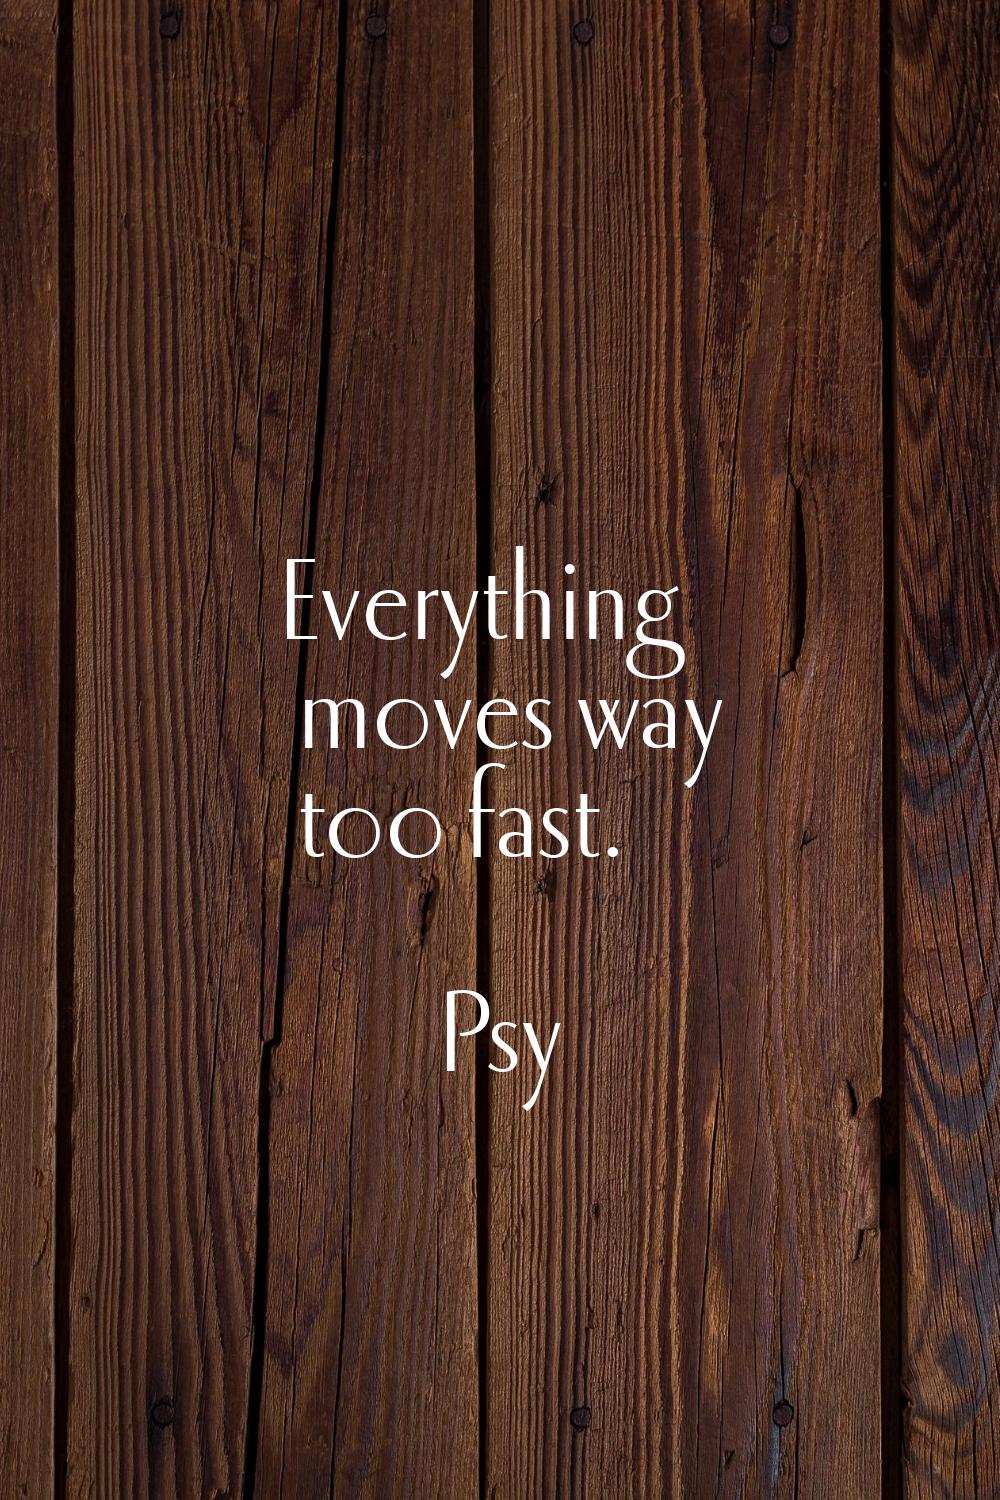 Everything moves way too fast.